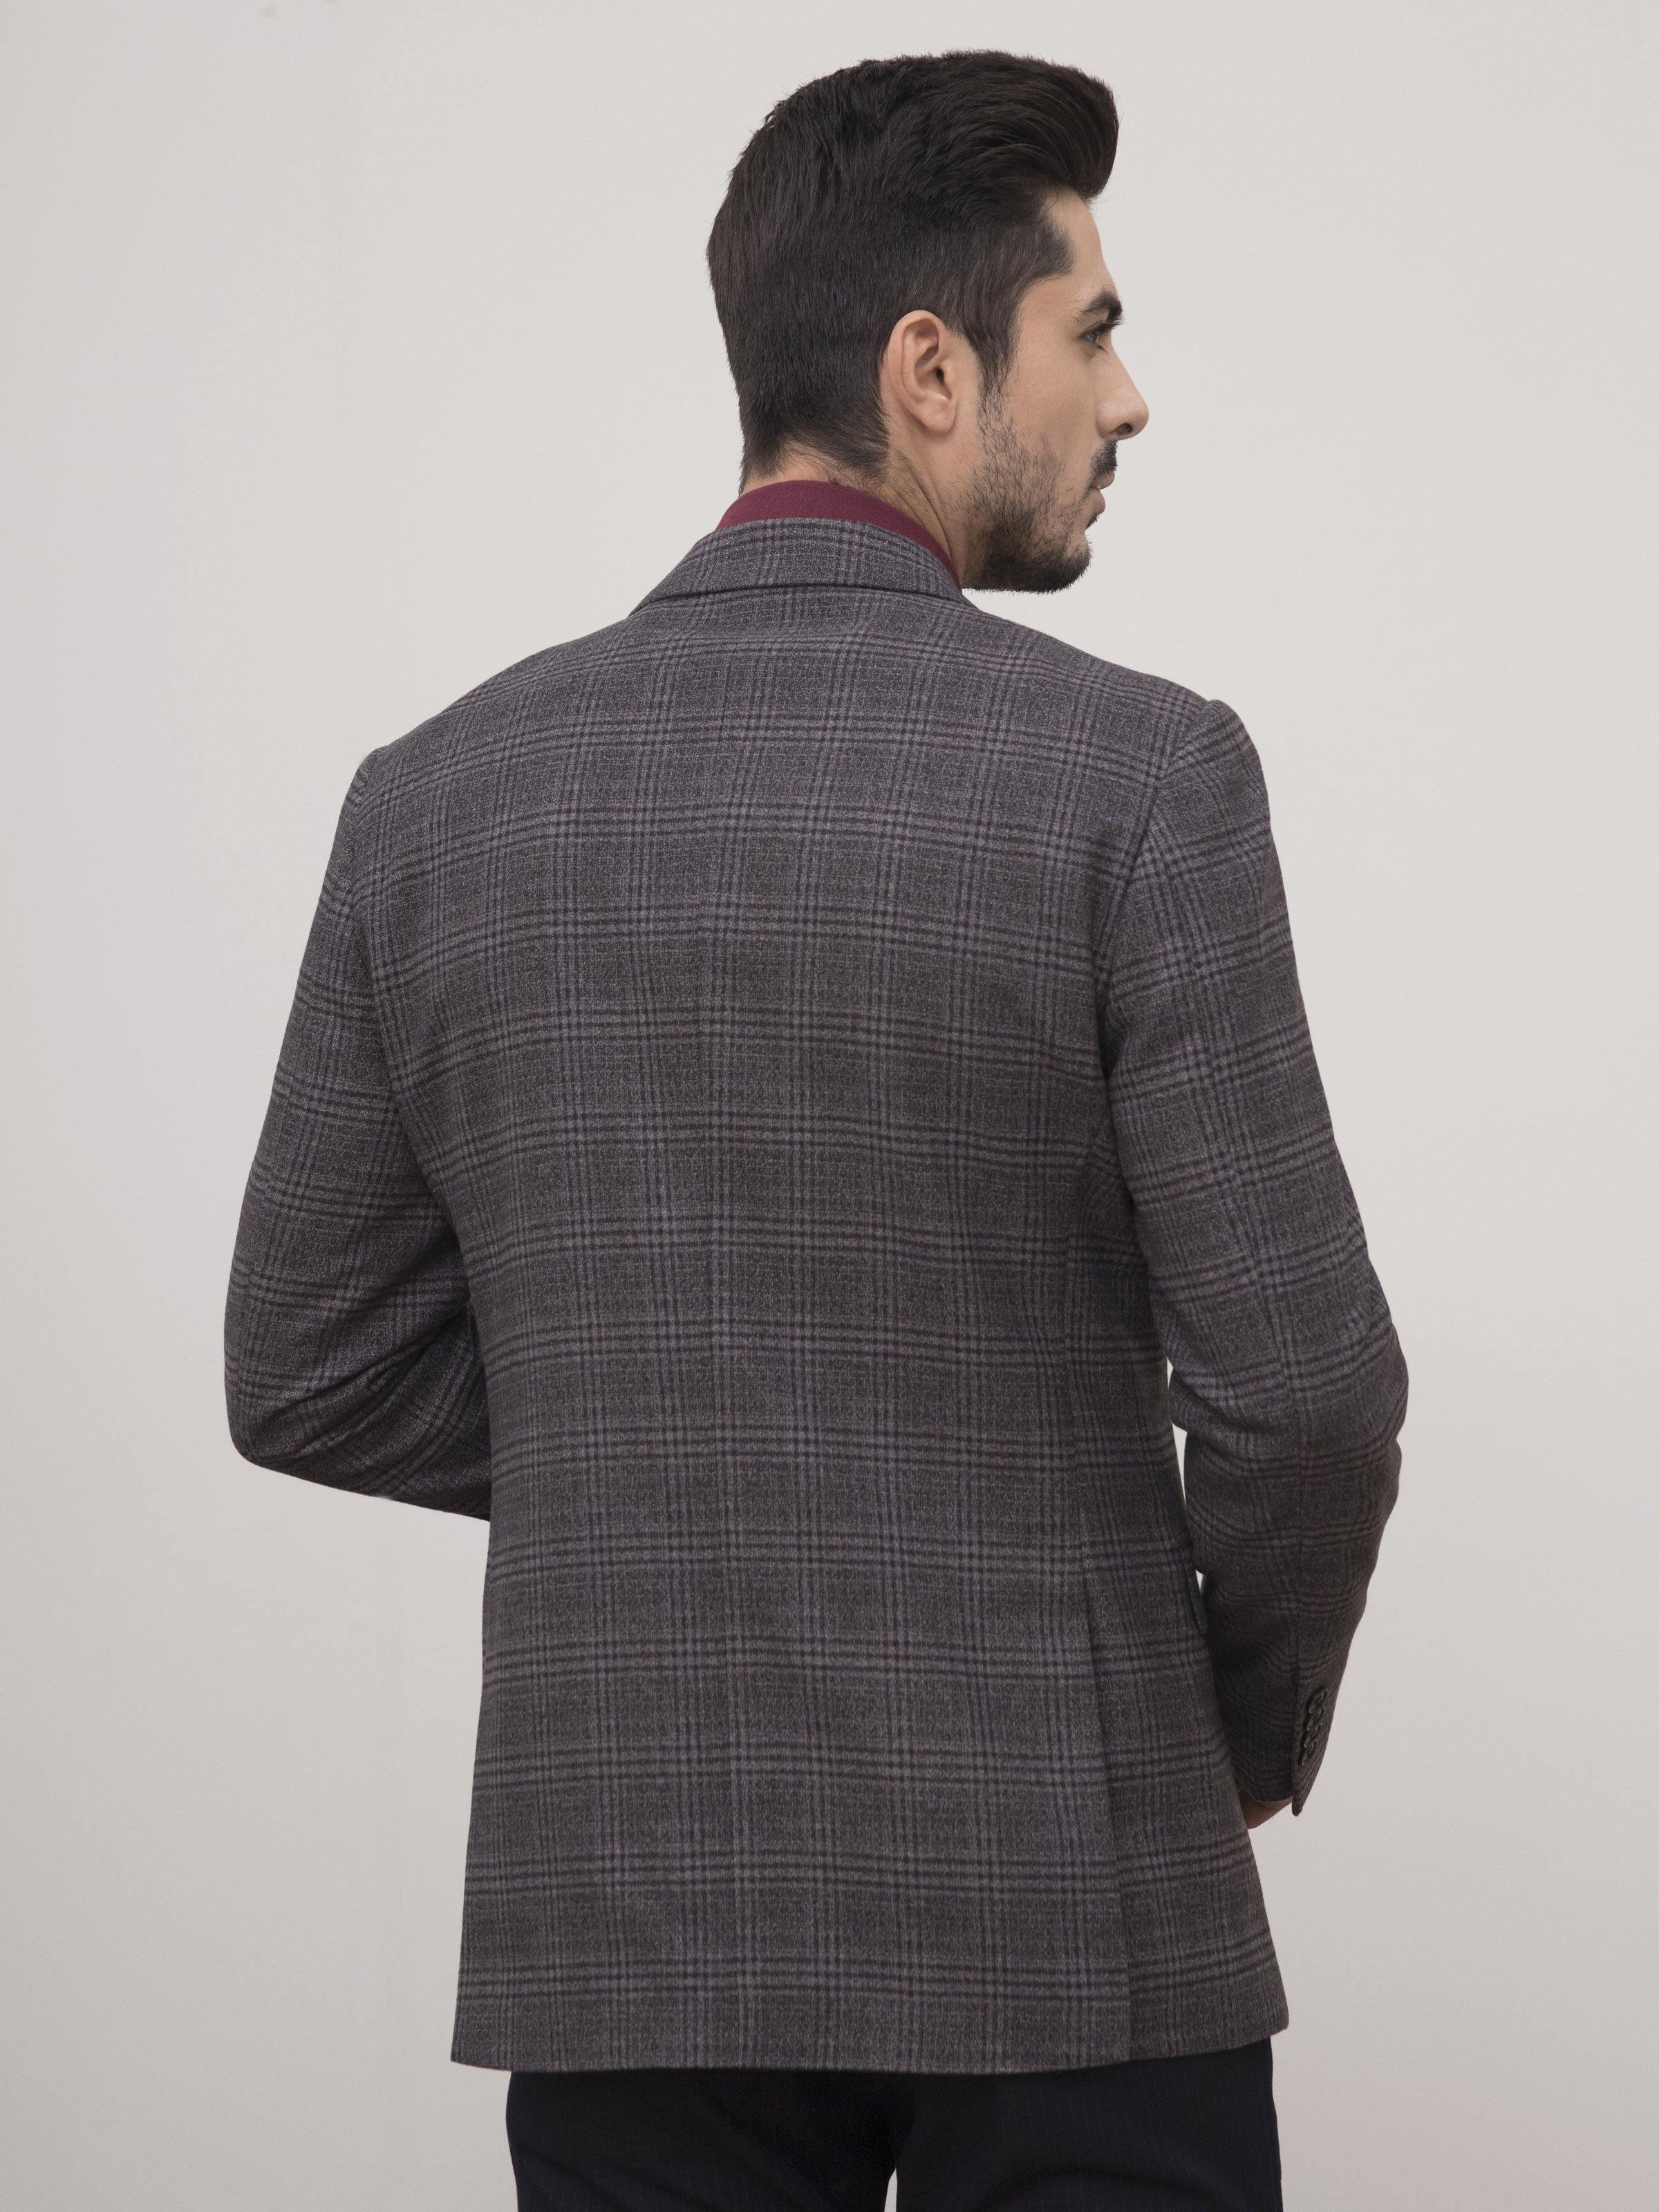 WOOLEN COAT 2 BUTTON SLIM FIT GREY BLACK at Charcoal Clothing